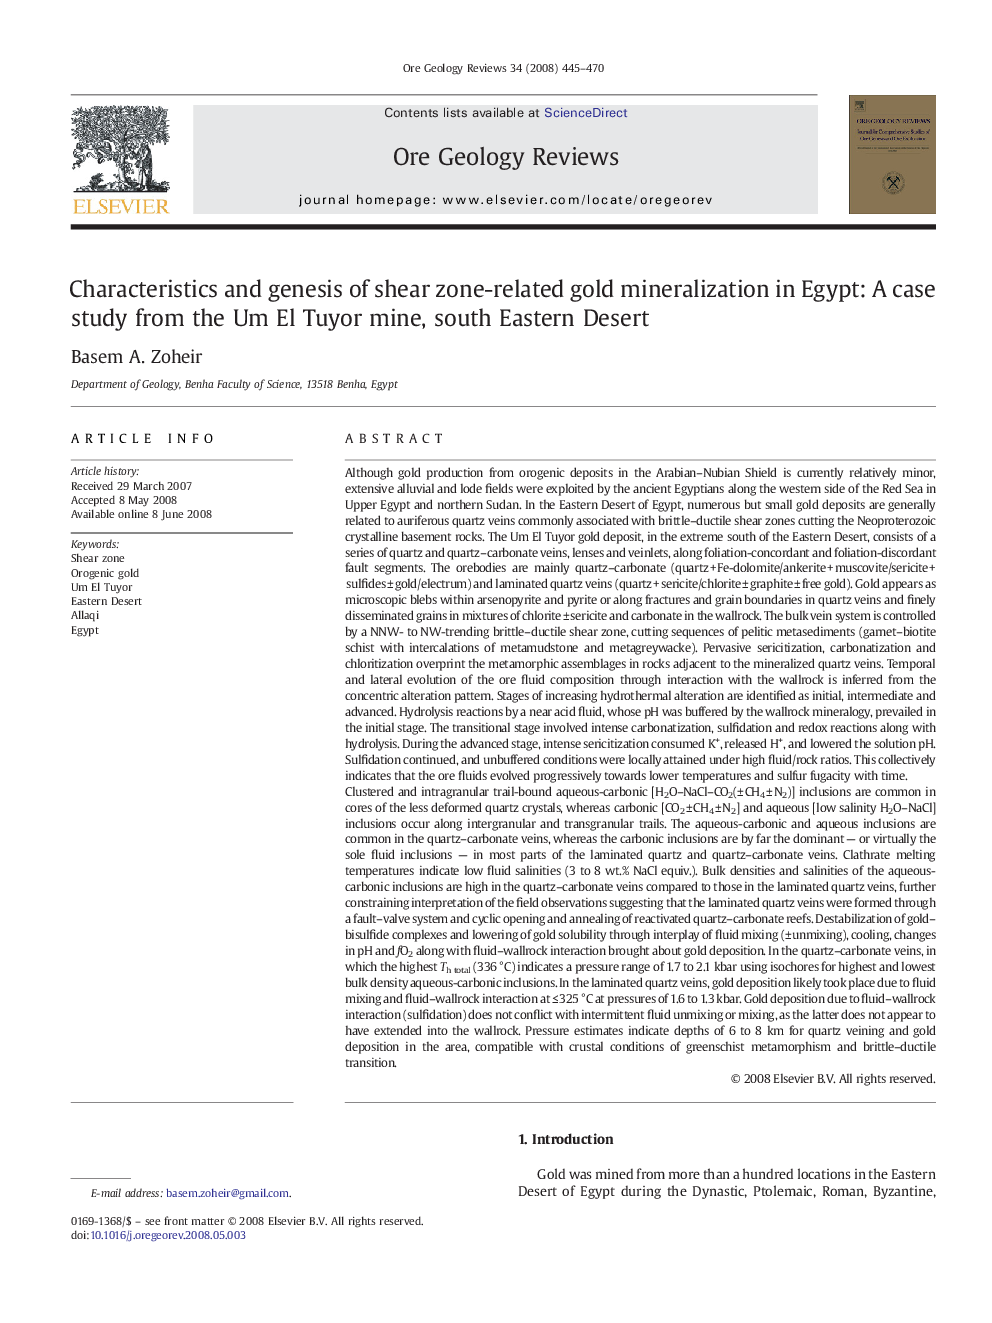 Characteristics and genesis of shear zone-related gold mineralization in Egypt: A case study from the Um El Tuyor mine, south Eastern Desert